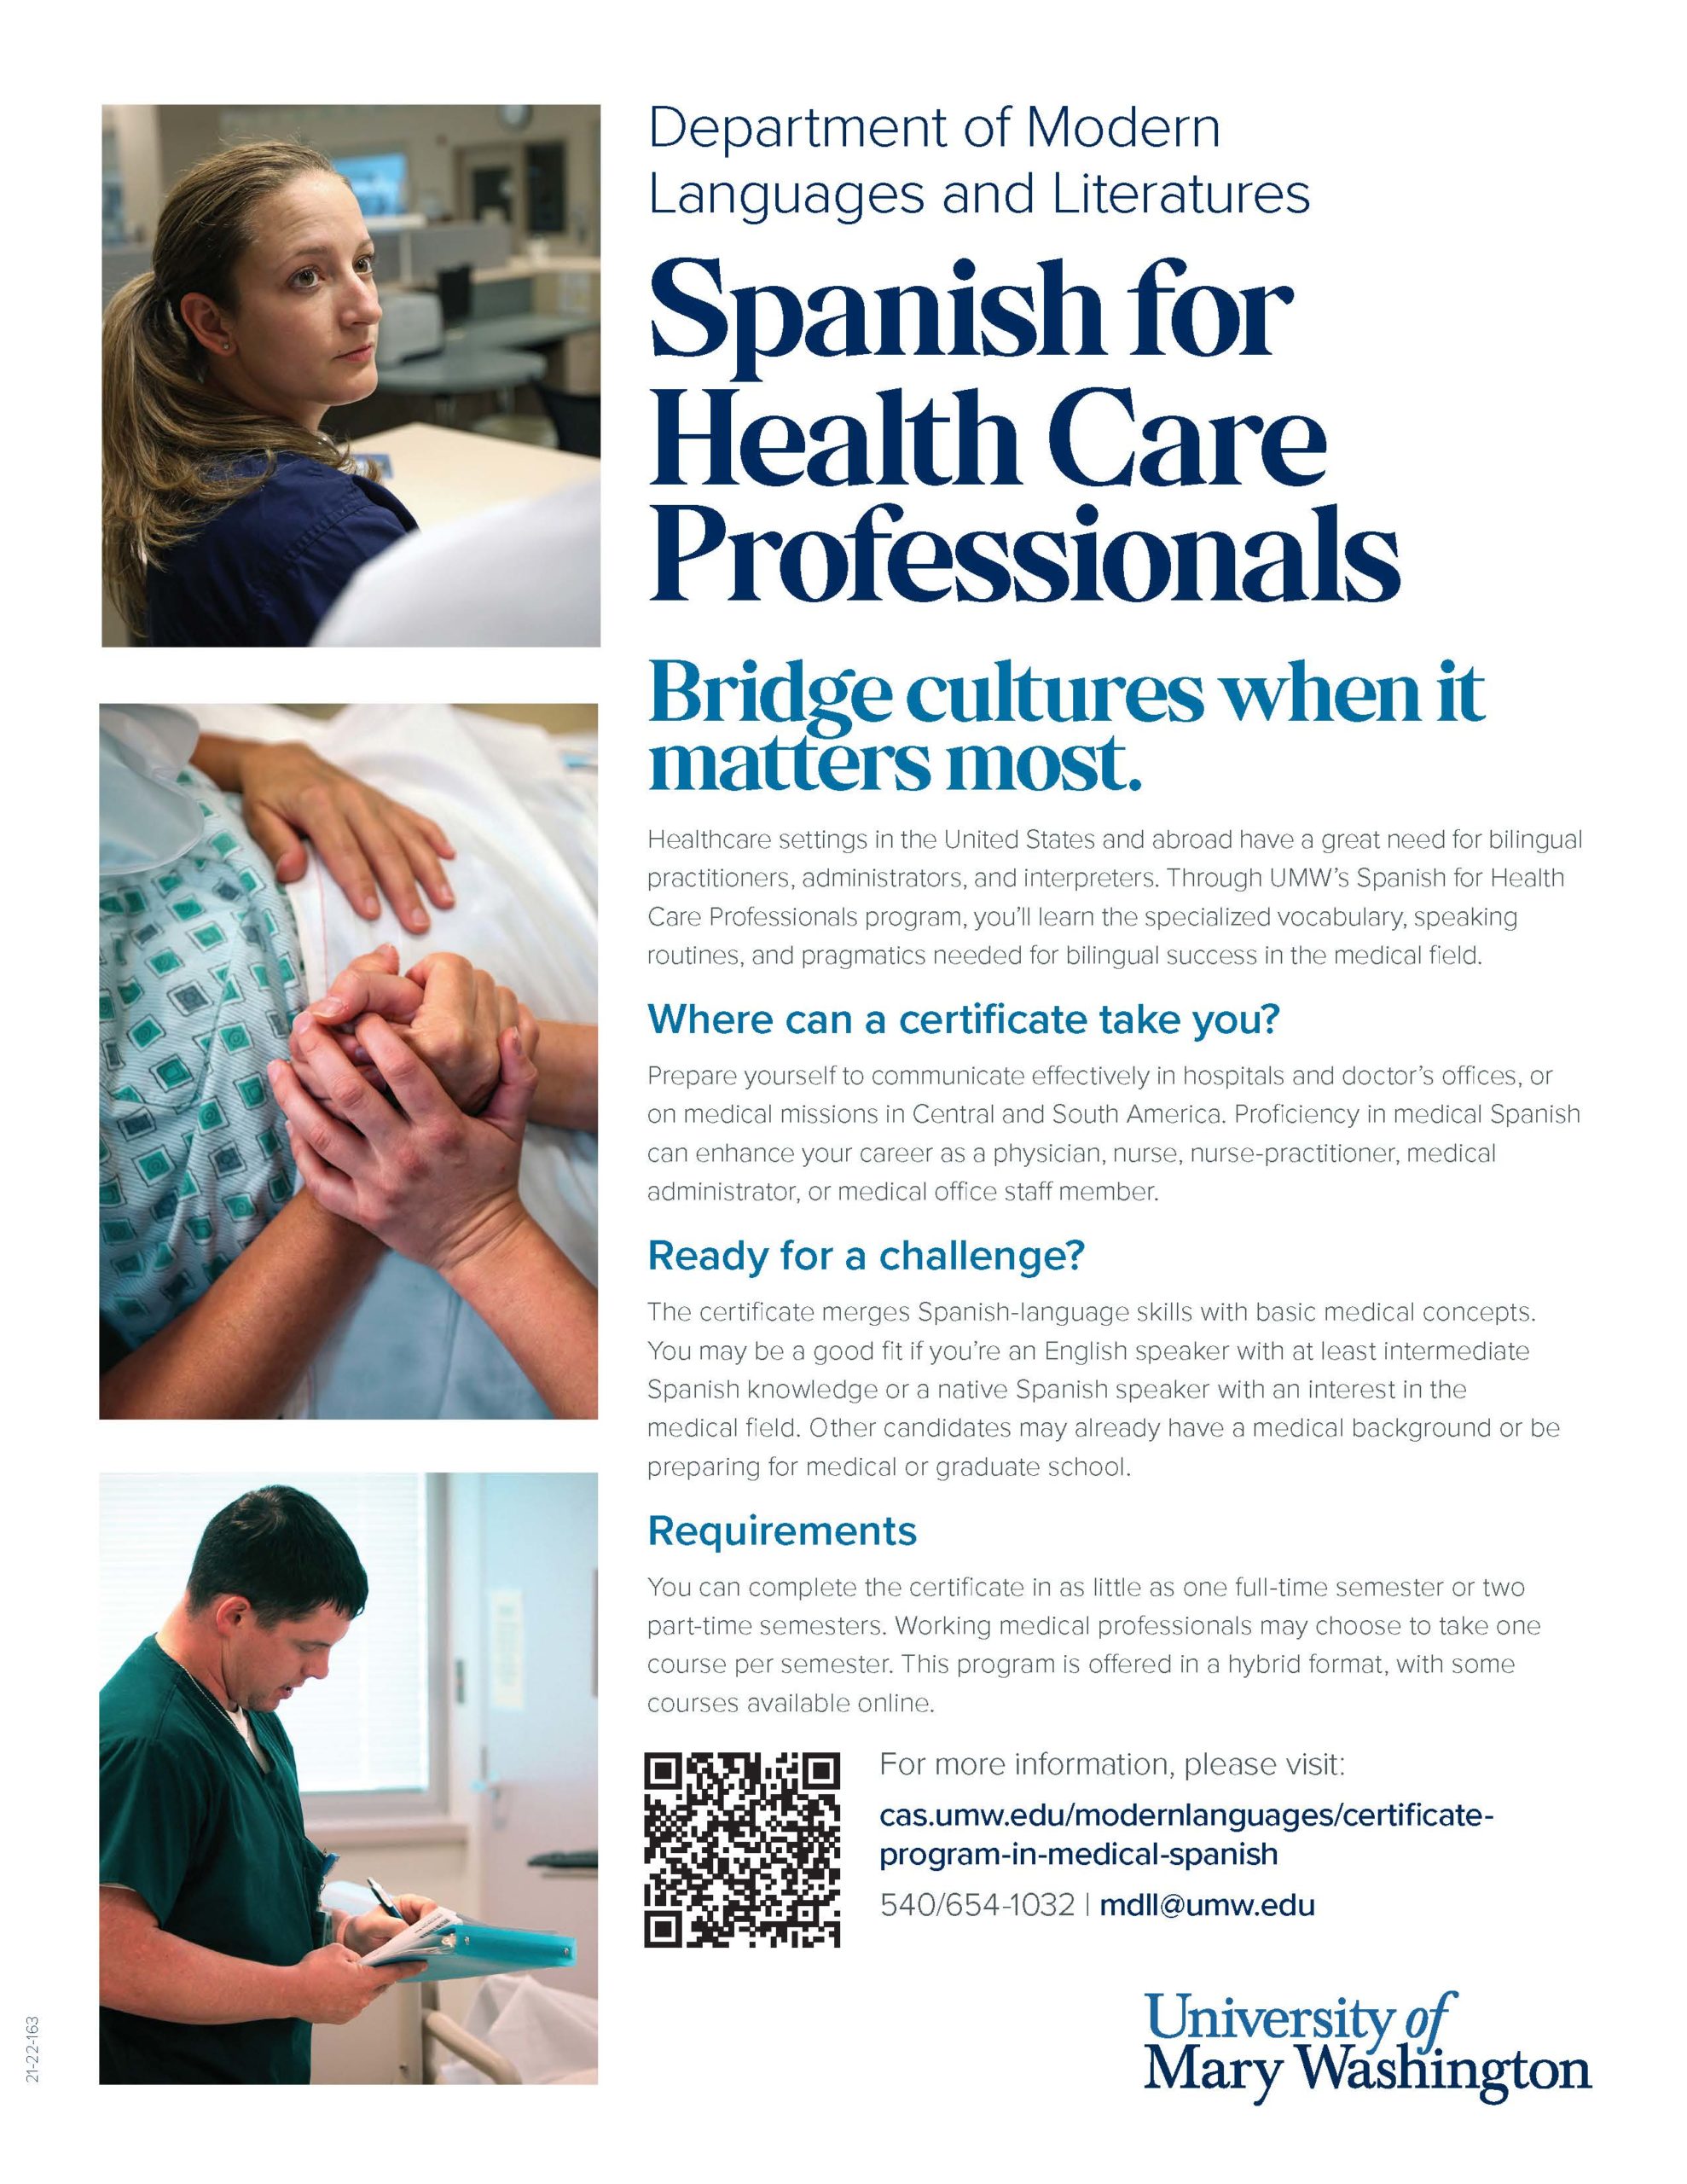 Flyer for Spanish for Health Care Professionals Certificate